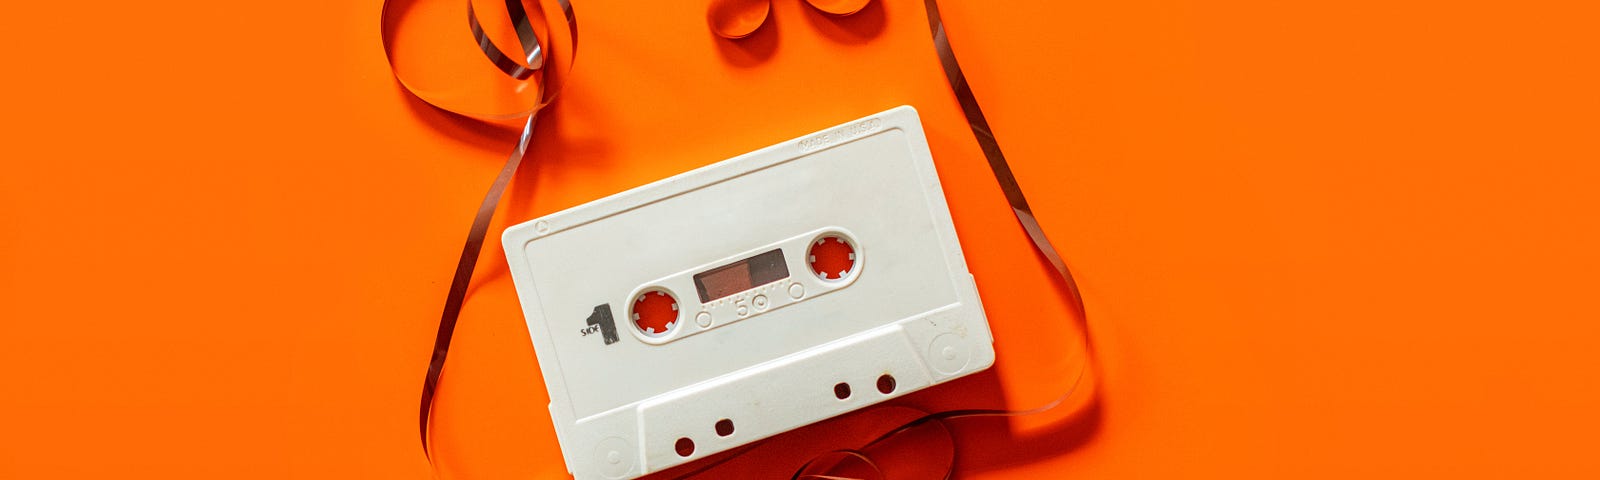 Decorative image: on an orange background, there’s a music cassette with its magnetic tape all messy